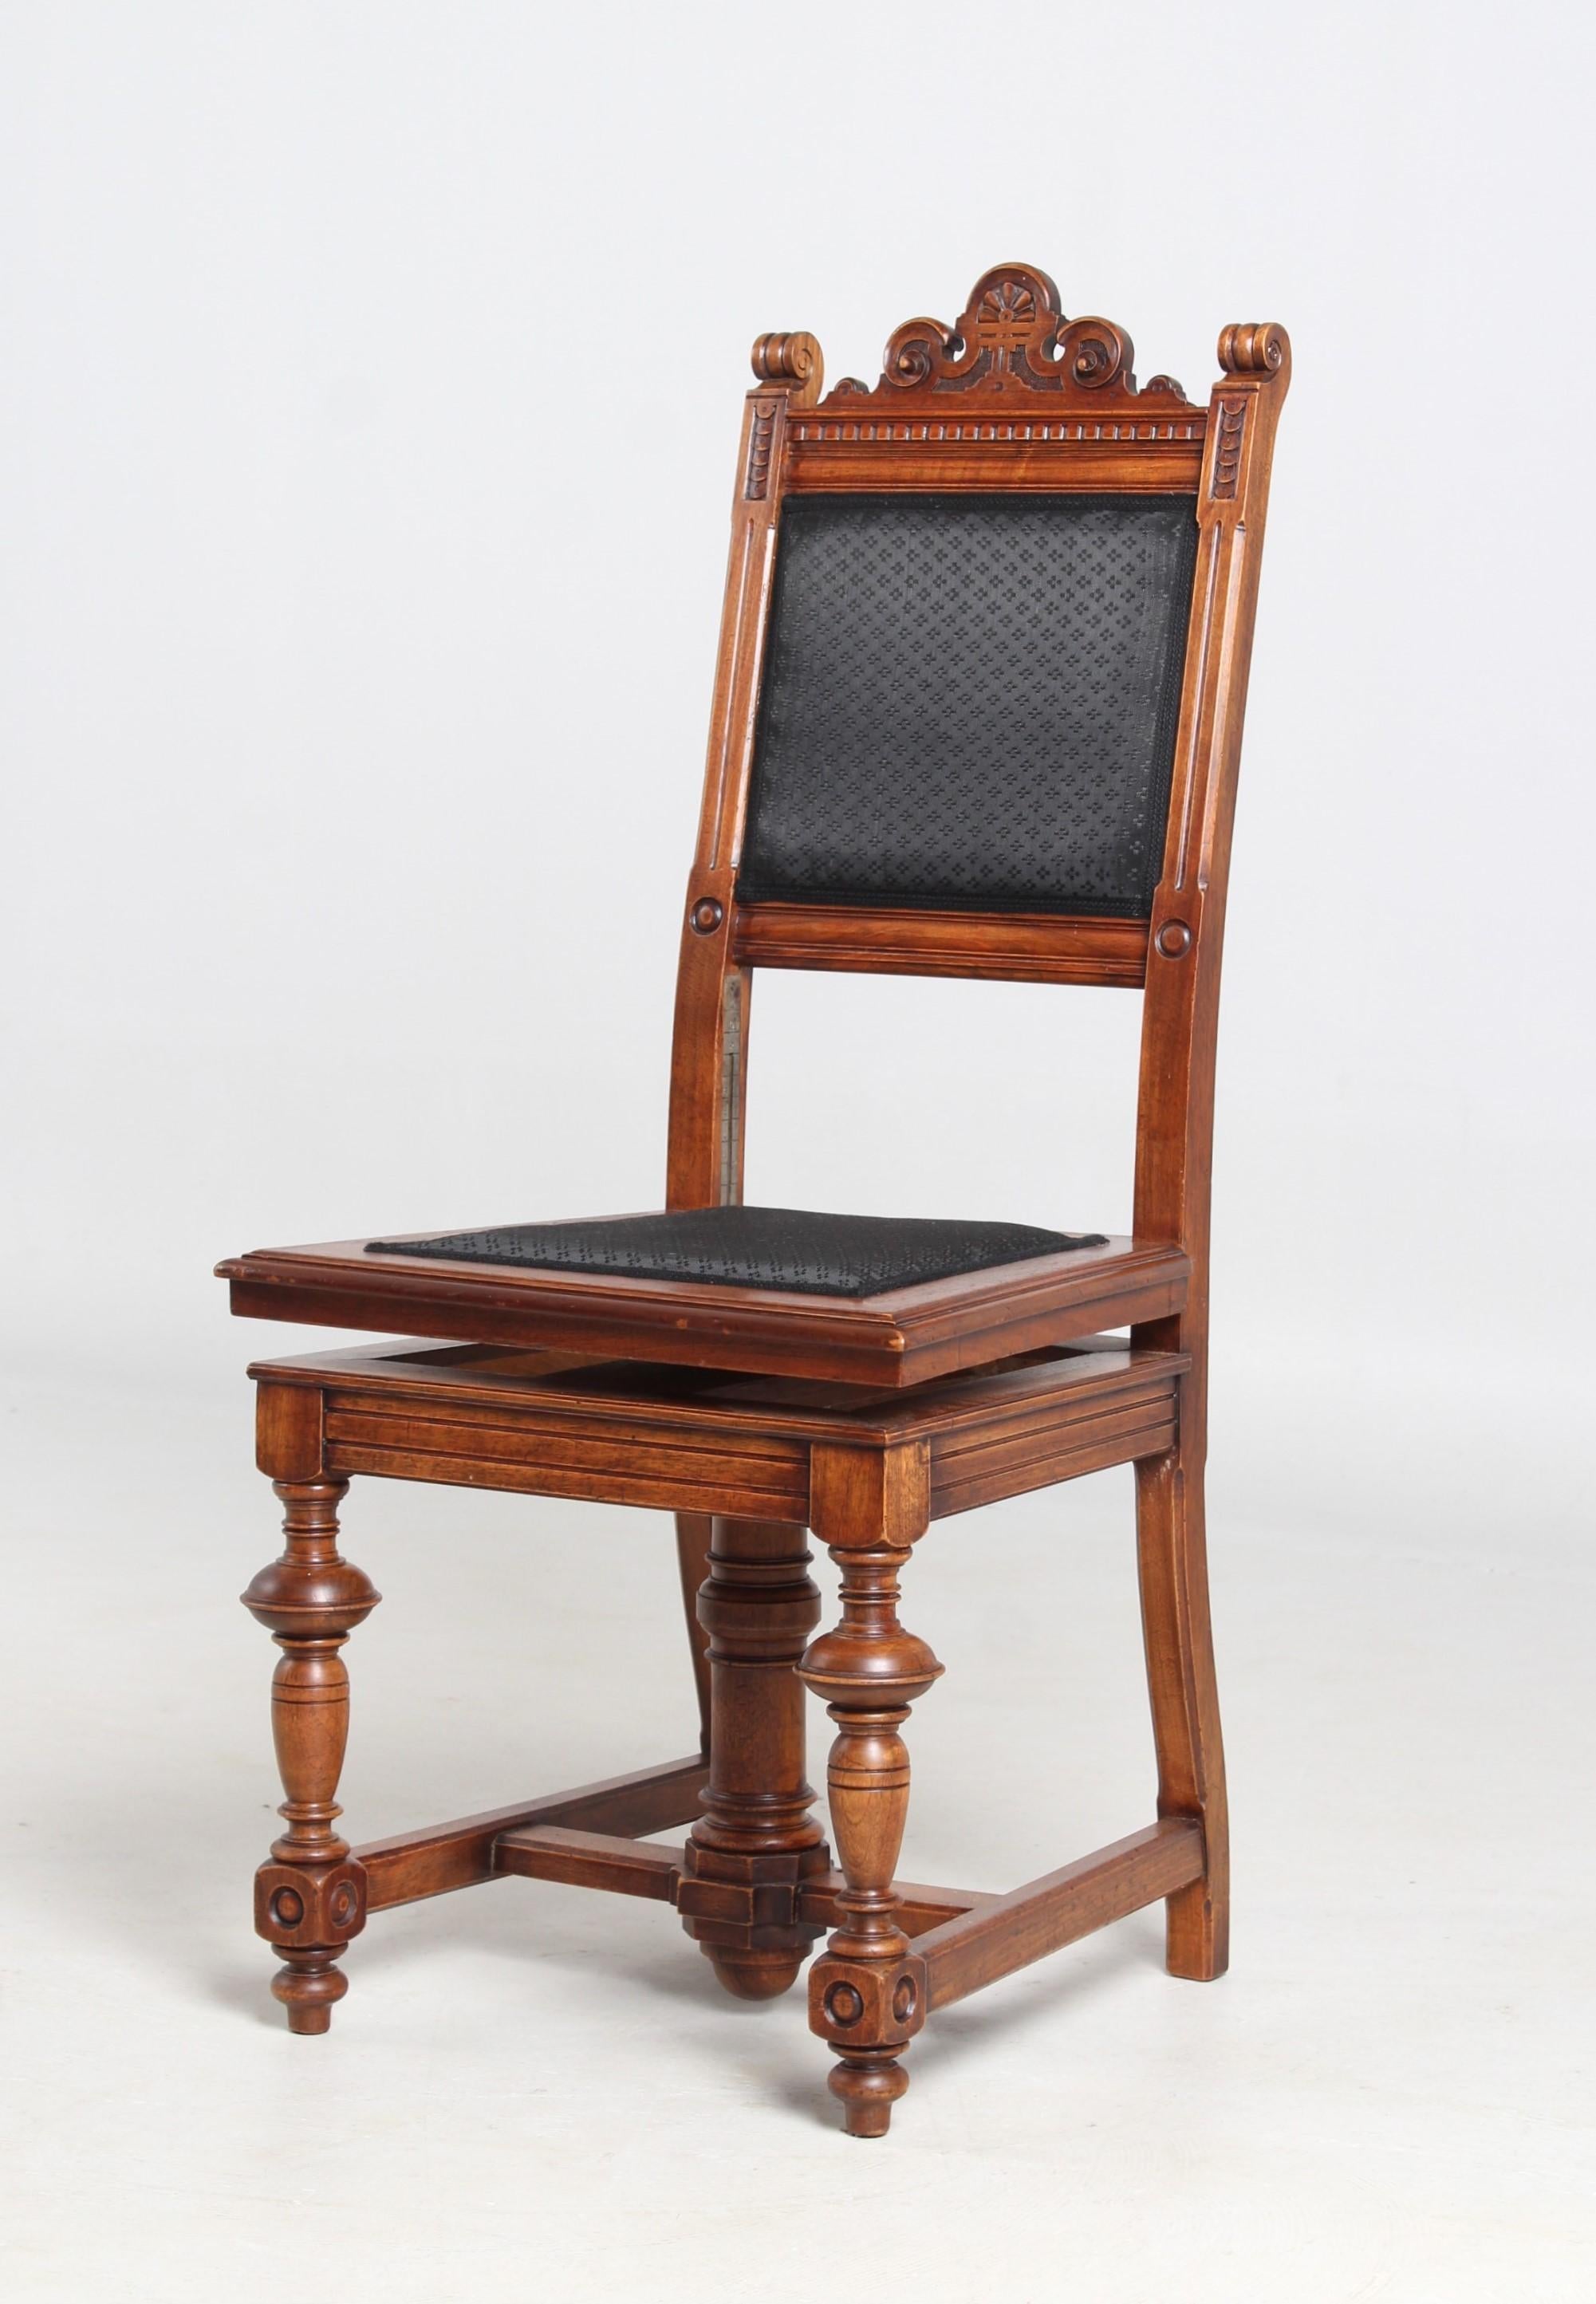 Antique height adjustable piano chair

Germany
Walnut
Wilhelminian period around 1890

Dimensions: H x W x D: 105 x 46 x 45 cm, seat height variable from H 46 - 58 cm

Description:
Quite extraordinary and extremely rare to find in this form piano